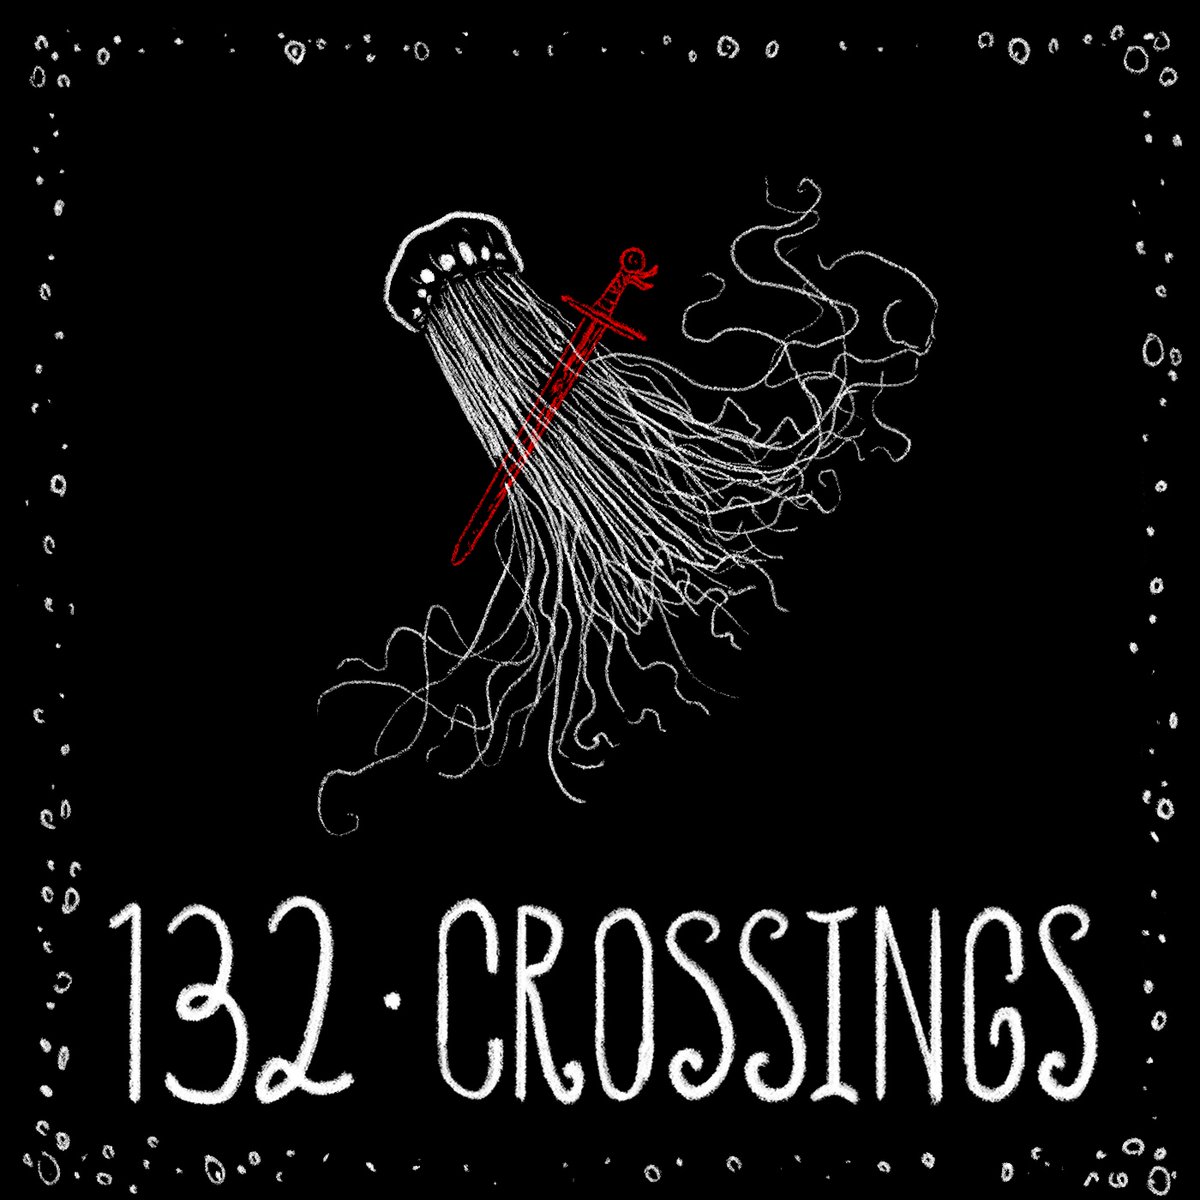 Yaretzi visits the Faceless King, Riot reaches the end, and Jacob Wicker speaks his mind. The theme of tonight's episode is Crossings. 

Our queer horror saga continues! Only 8 episodes left to our Halloween finale 💀✨

open.spotify.com/show/05dIxkX1H…

#lgbtq #audiodrama #horrorpodcast